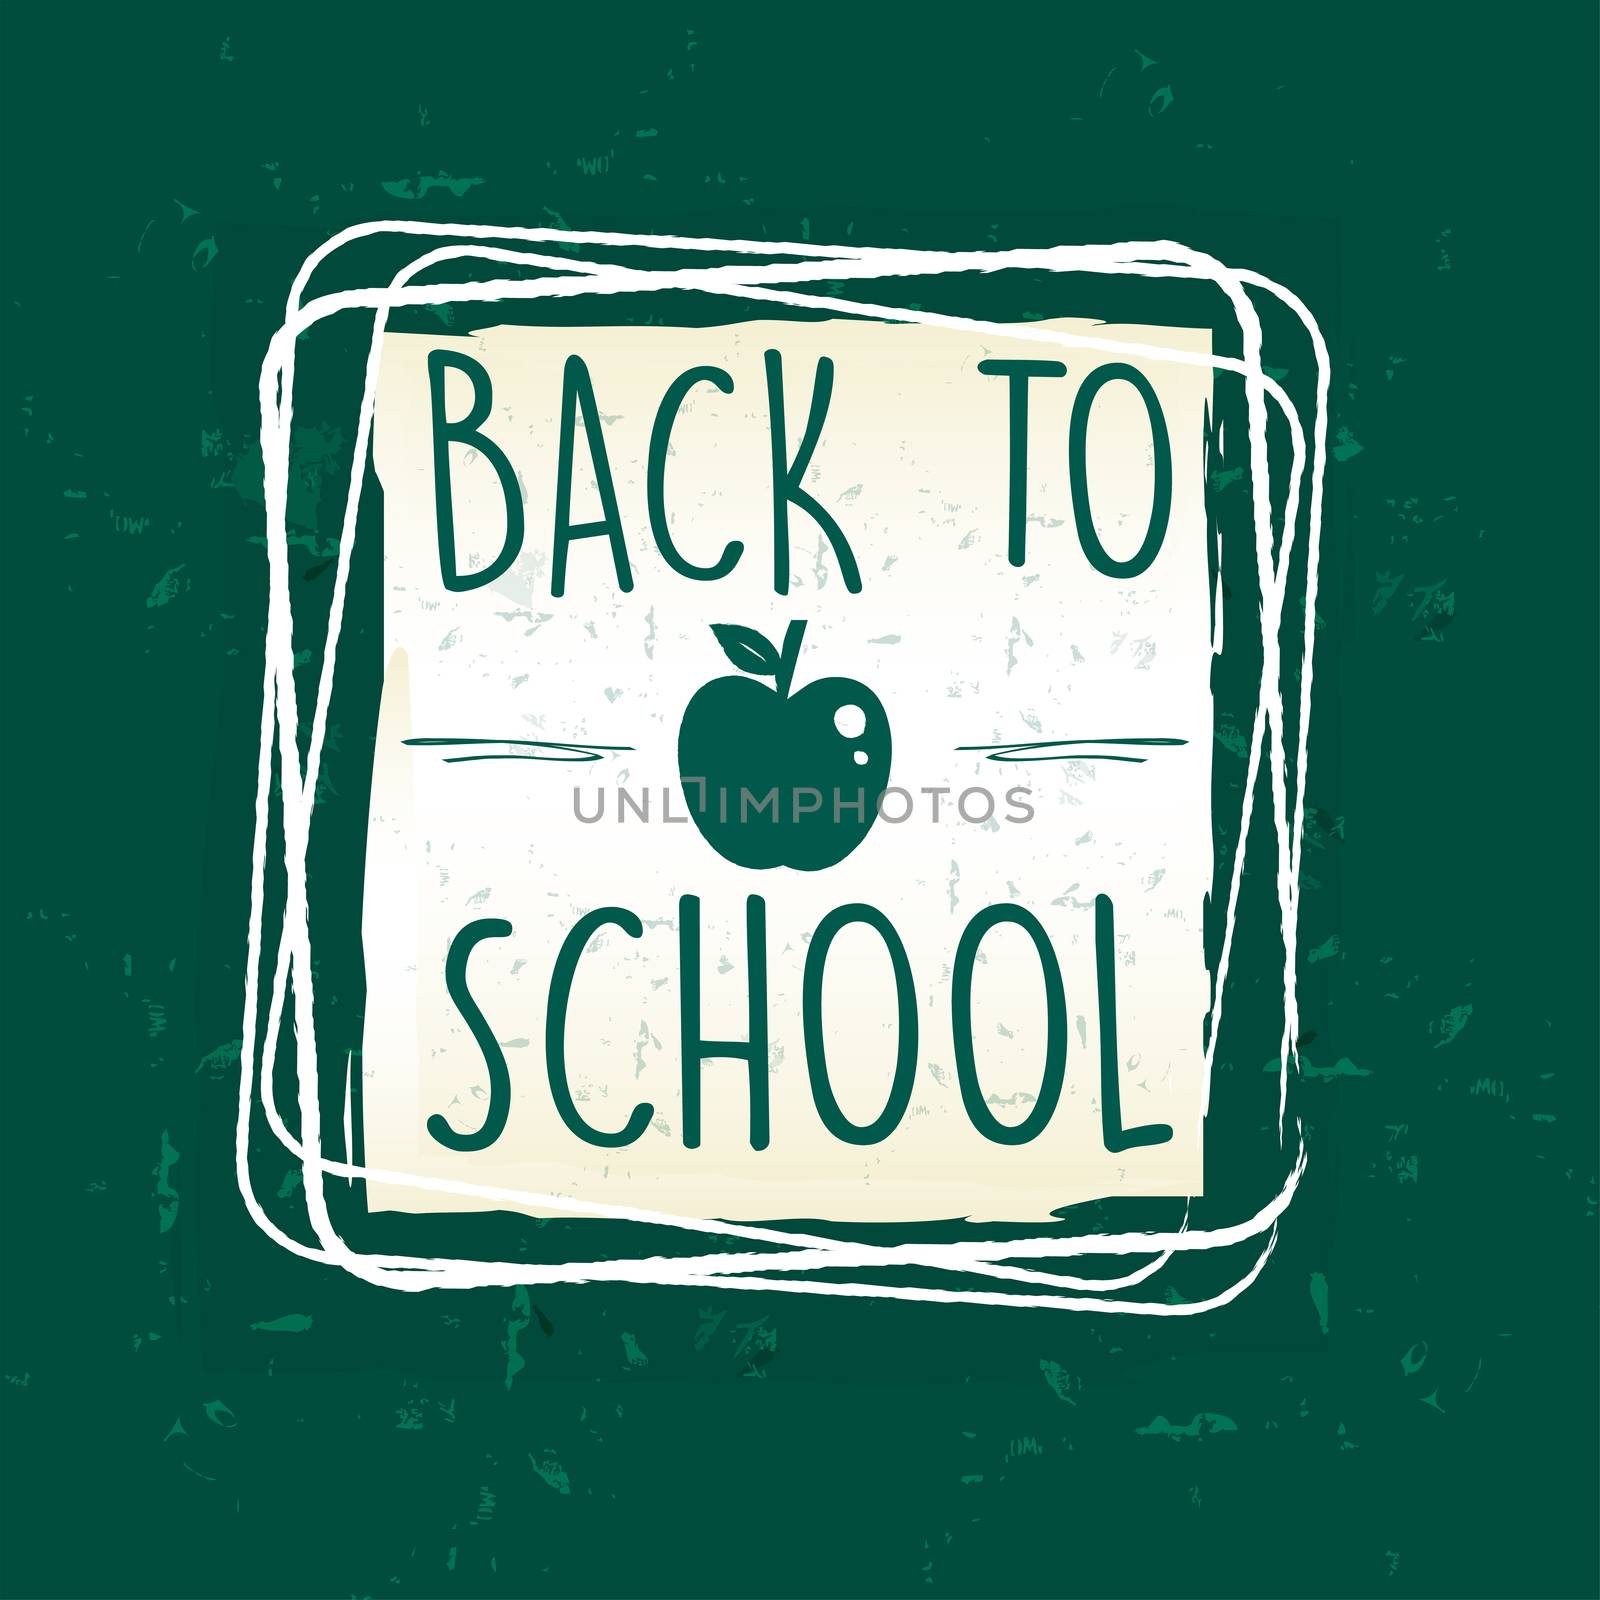 back to school text with apple symbol in frame over green old paper background, education concept